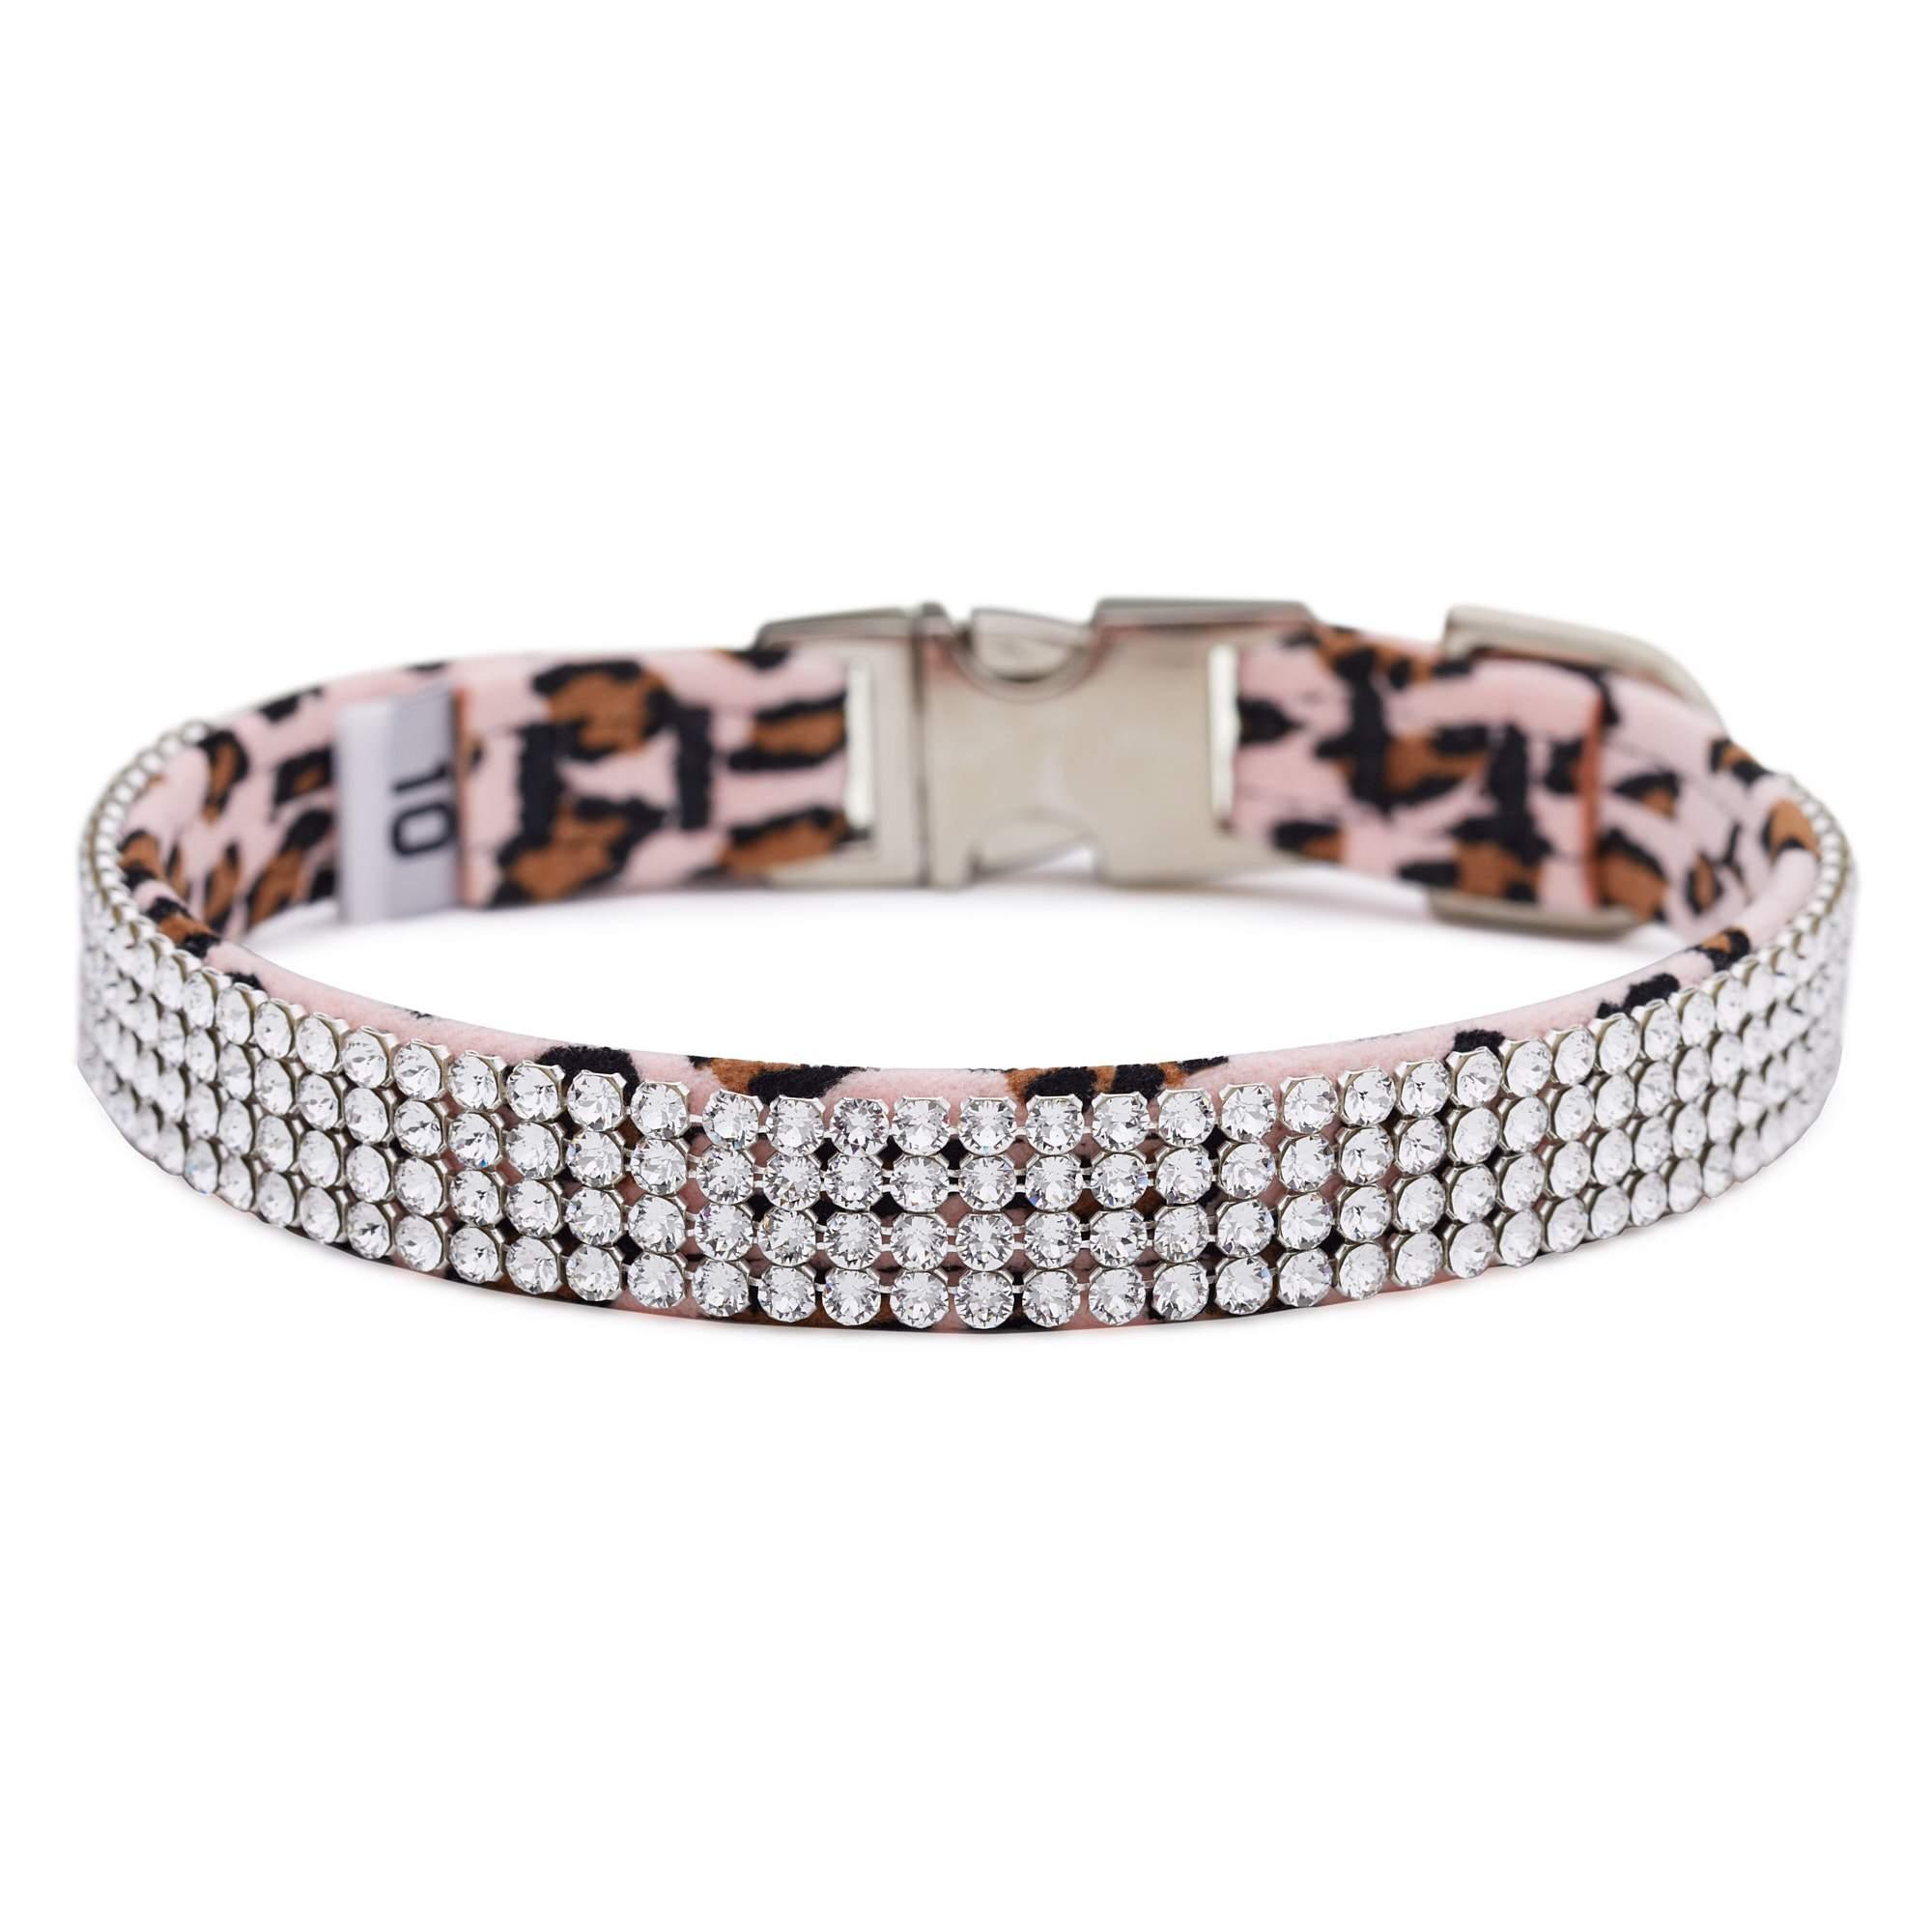 Pink Cheetah 4 Row Giltmore Perfect Fit Collar - Rocky & Maggie's Pet Boutique and Salon